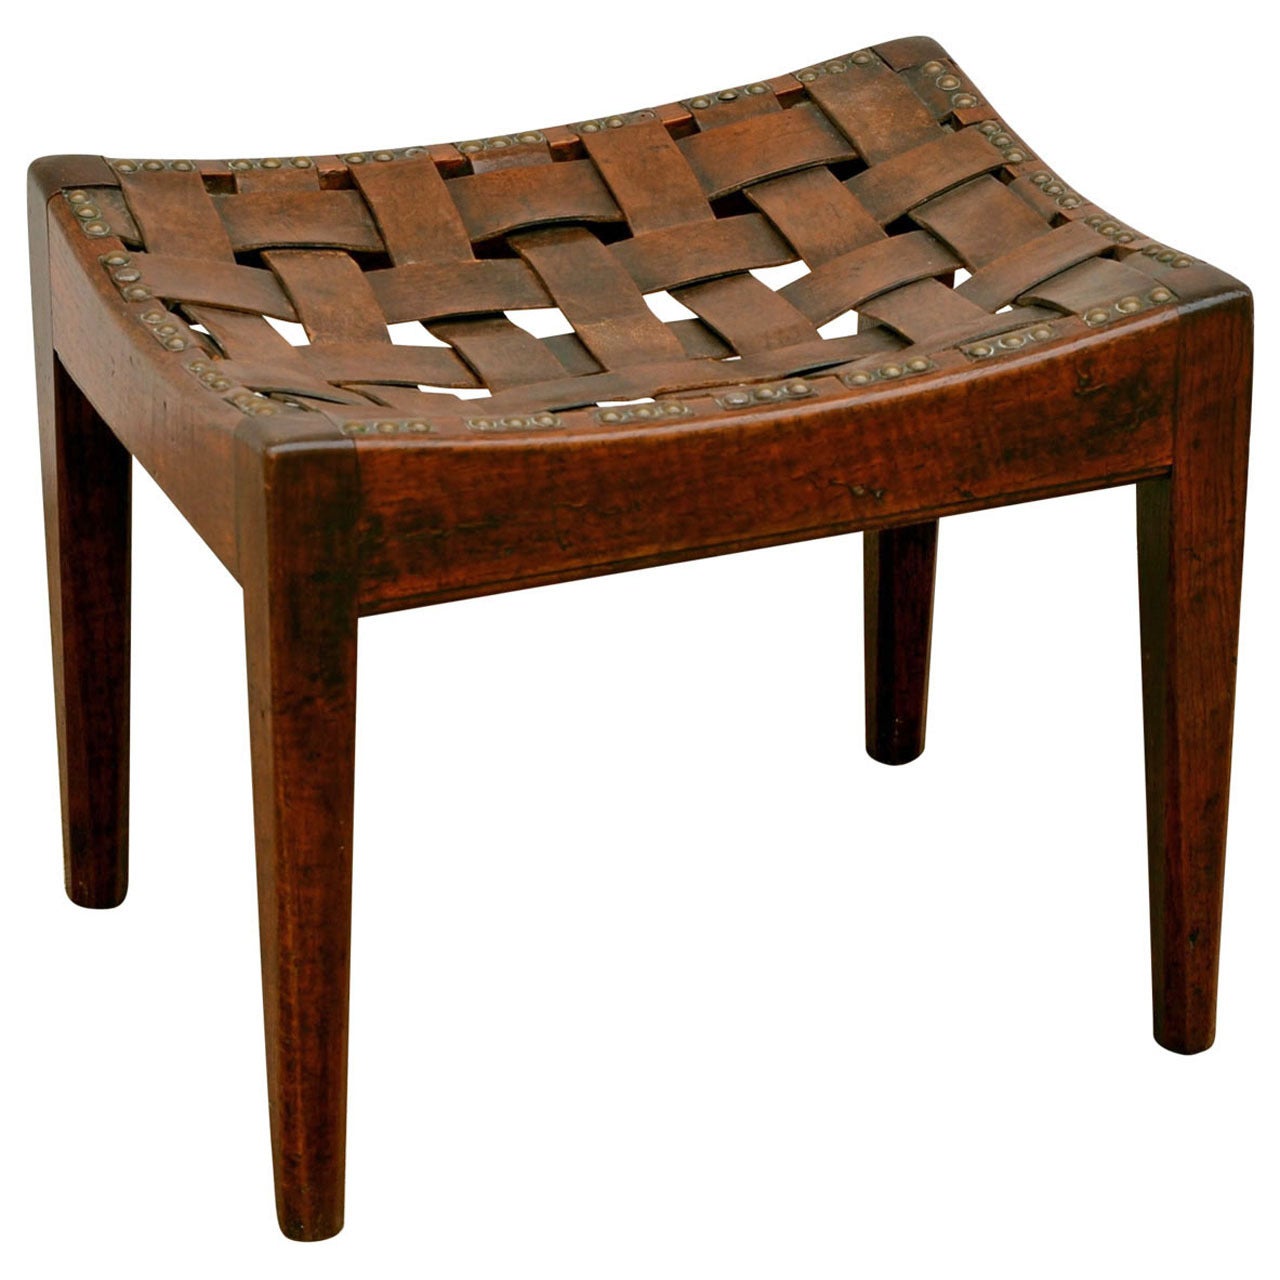 English Arts and Crafts Polished Oak and Leather Stool by Arthur Simpson